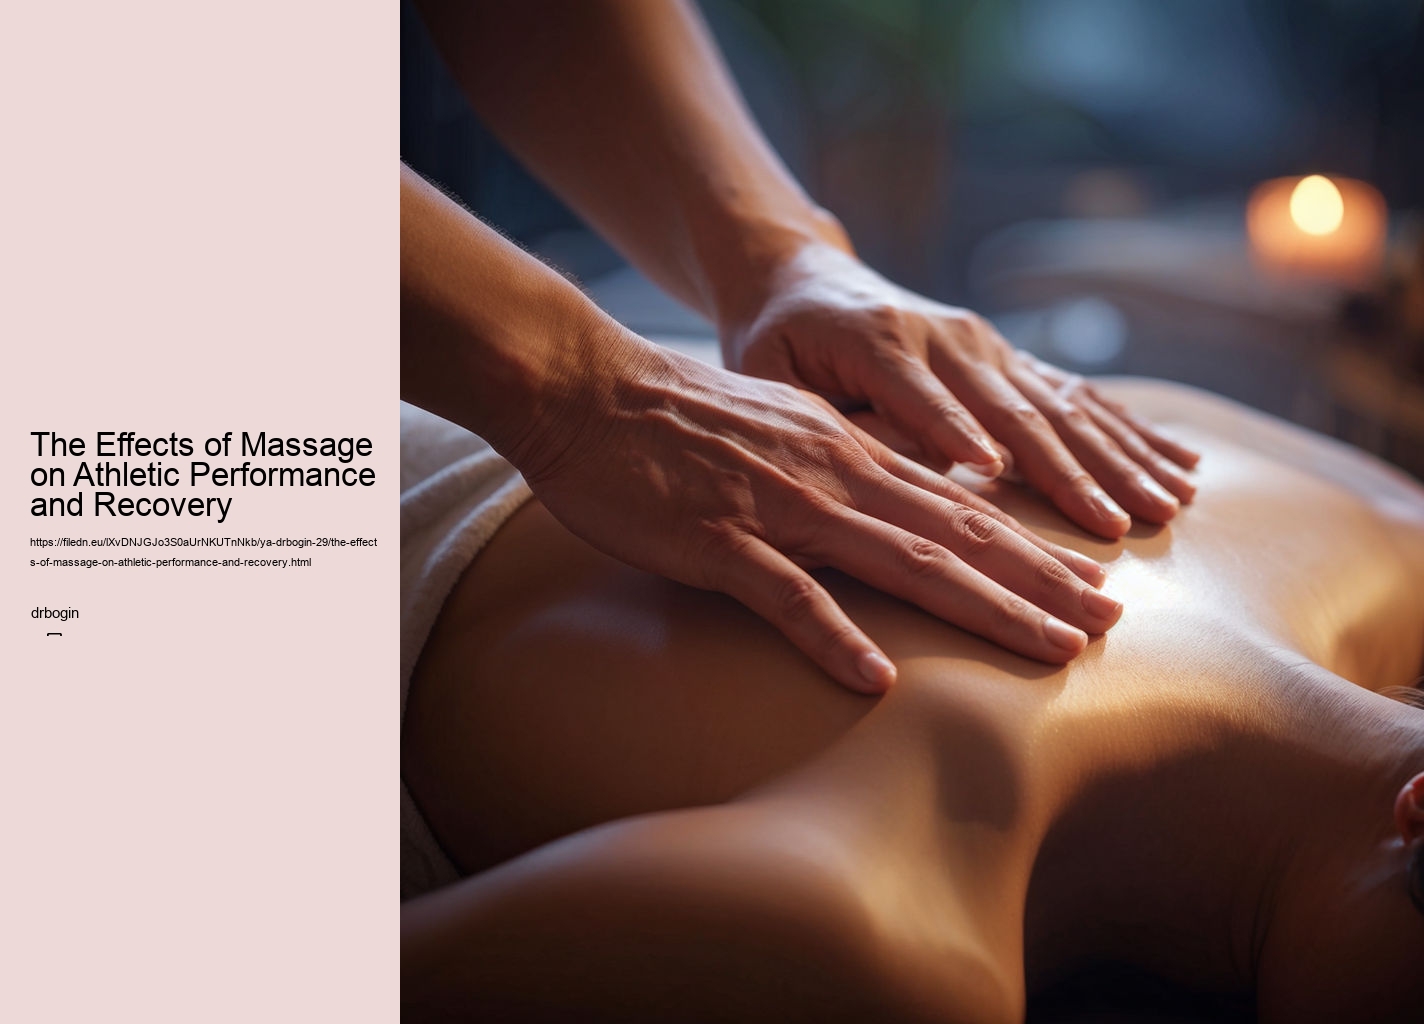 The Effects of Massage on Athletic Performance and Recovery